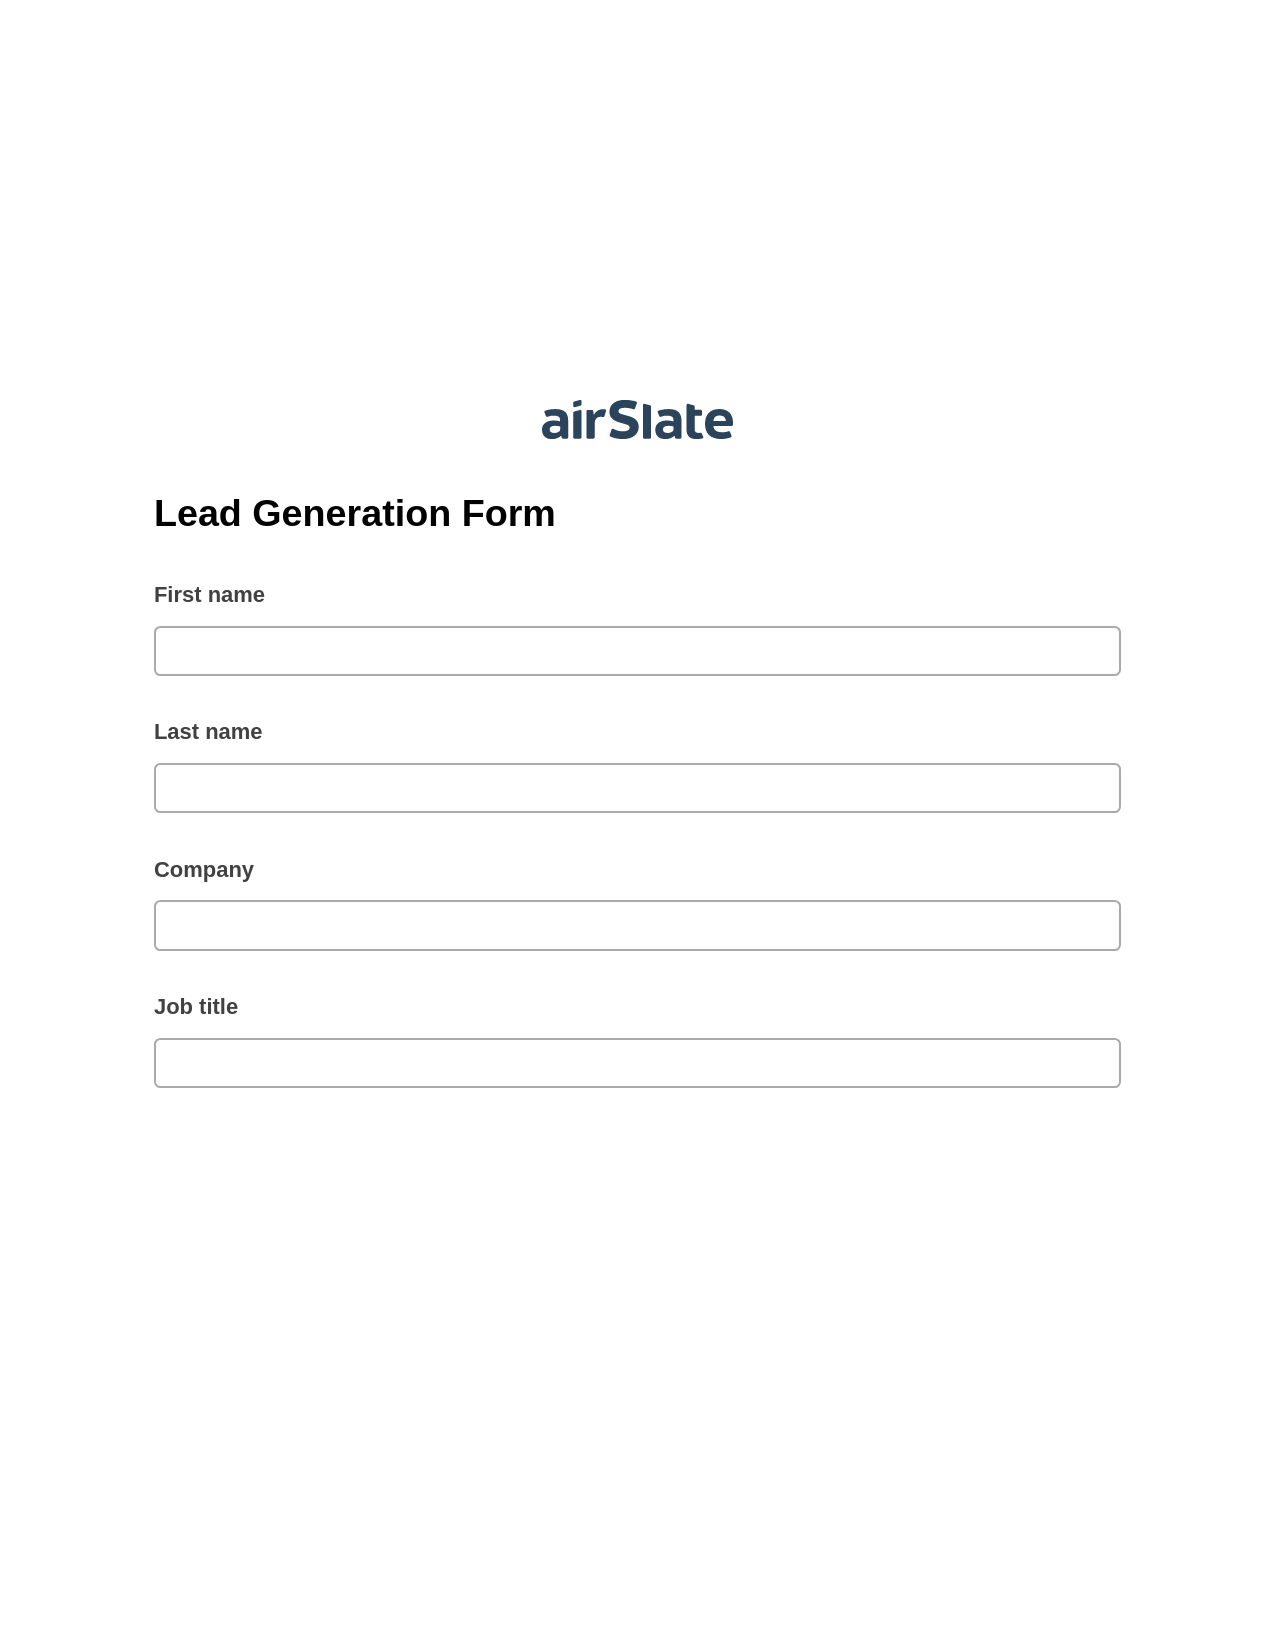 Lead Generation Form Pre-fill from CSV File Bot, Slack Notification Bot, Export to Excel 365 Bot